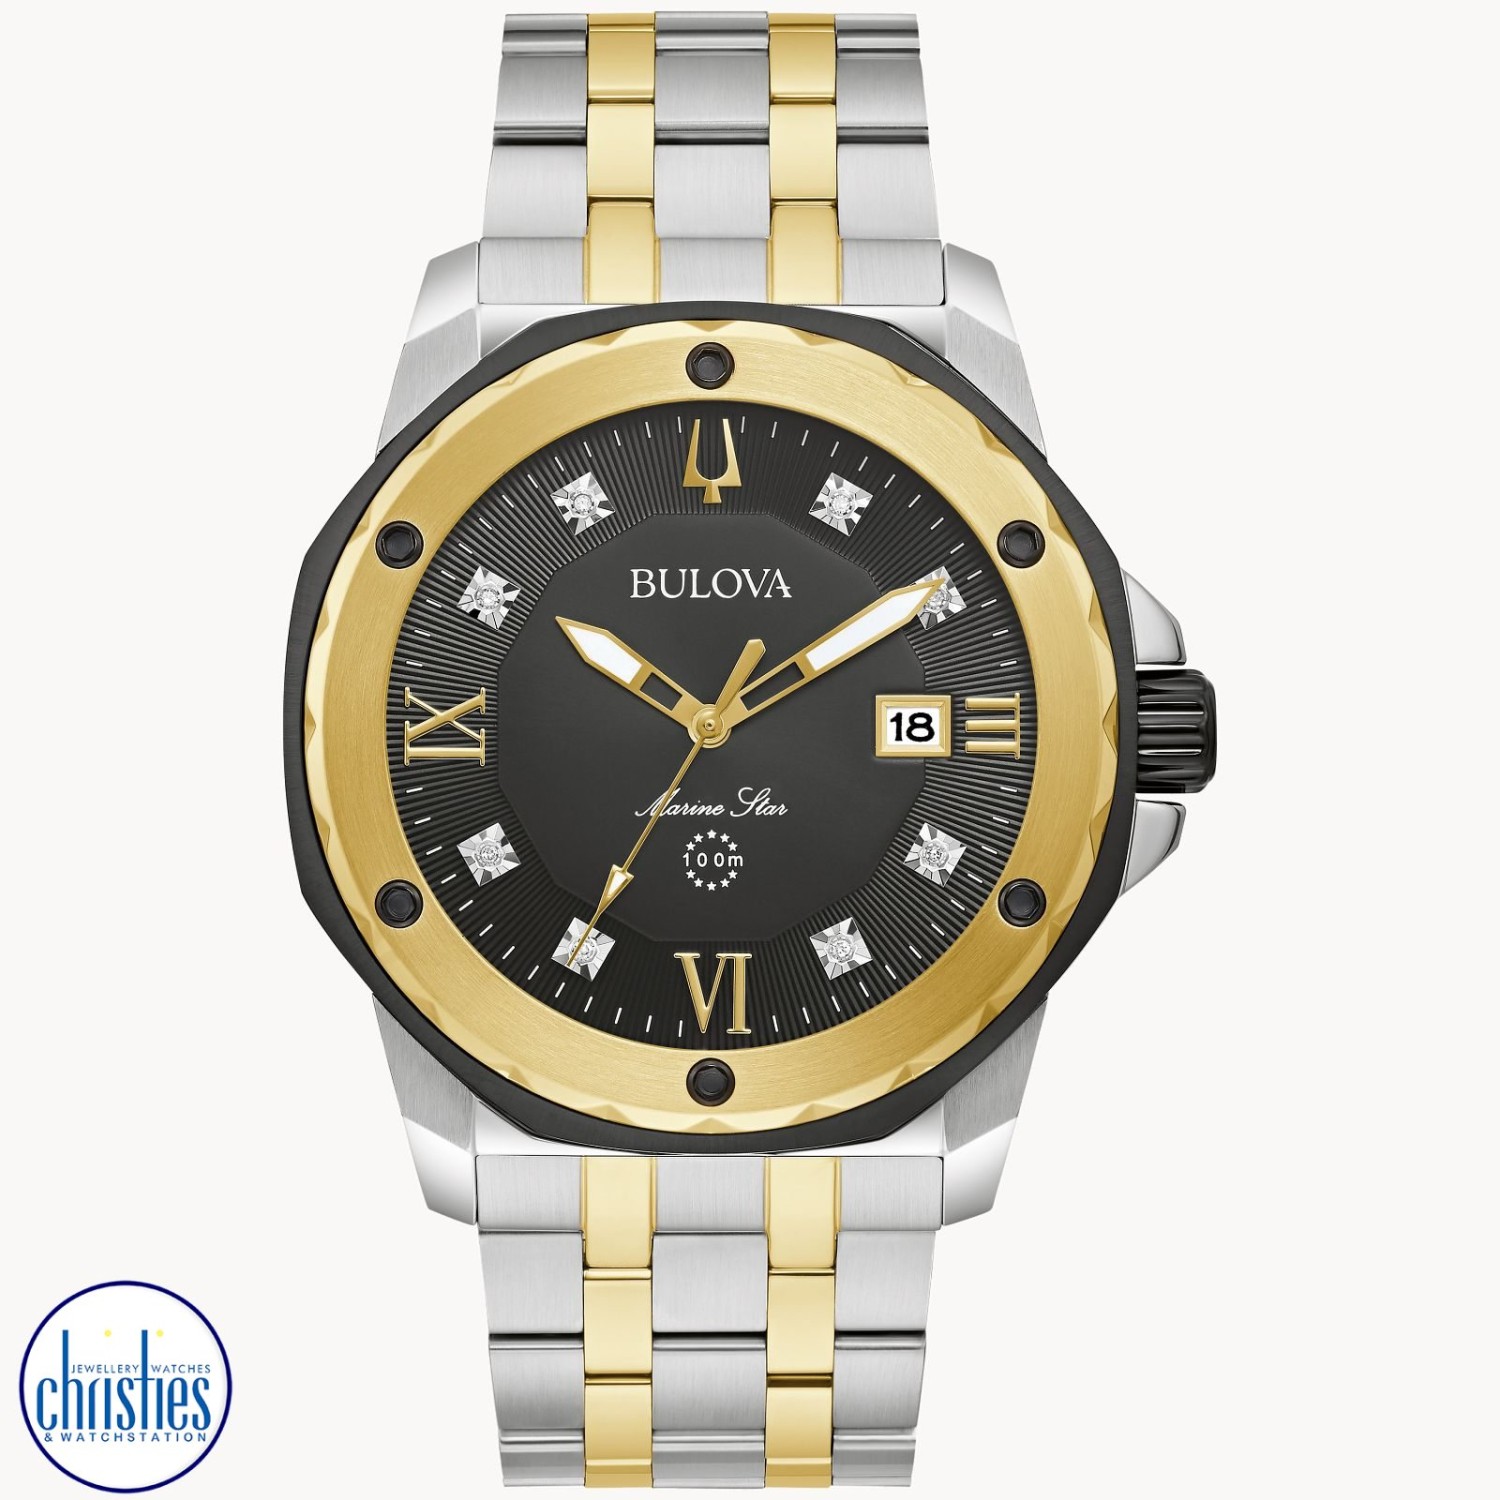 98D175 Bulova Mens Marine Star Watch. The Bulova Marine Star 98D175 is a luxurious and bold timepiece that stands out with its sporty design.